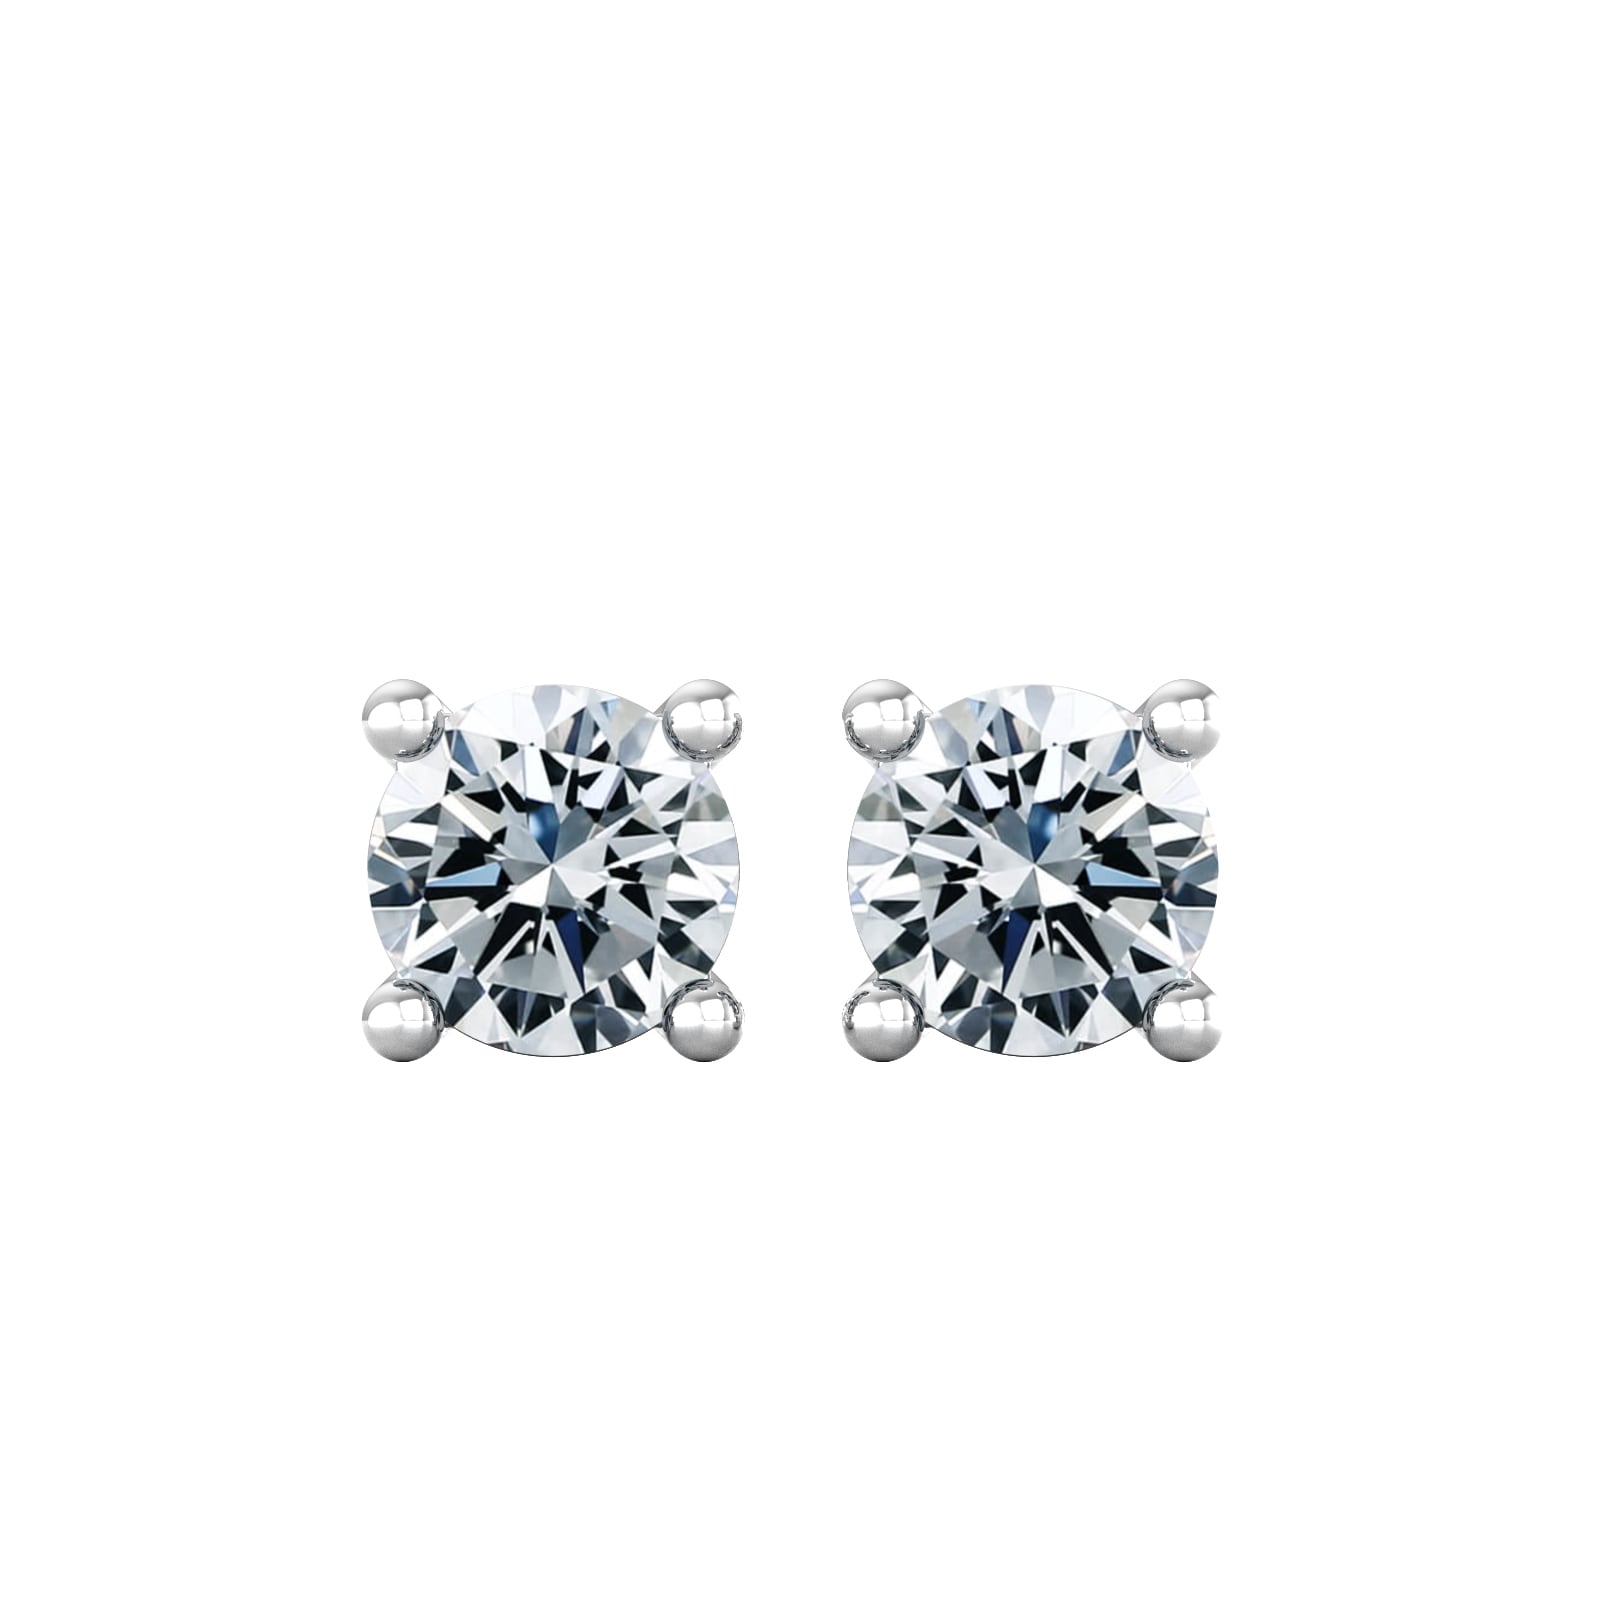 18ct White Gold 0.75cttw Solitaire Diamond Stud Earrings